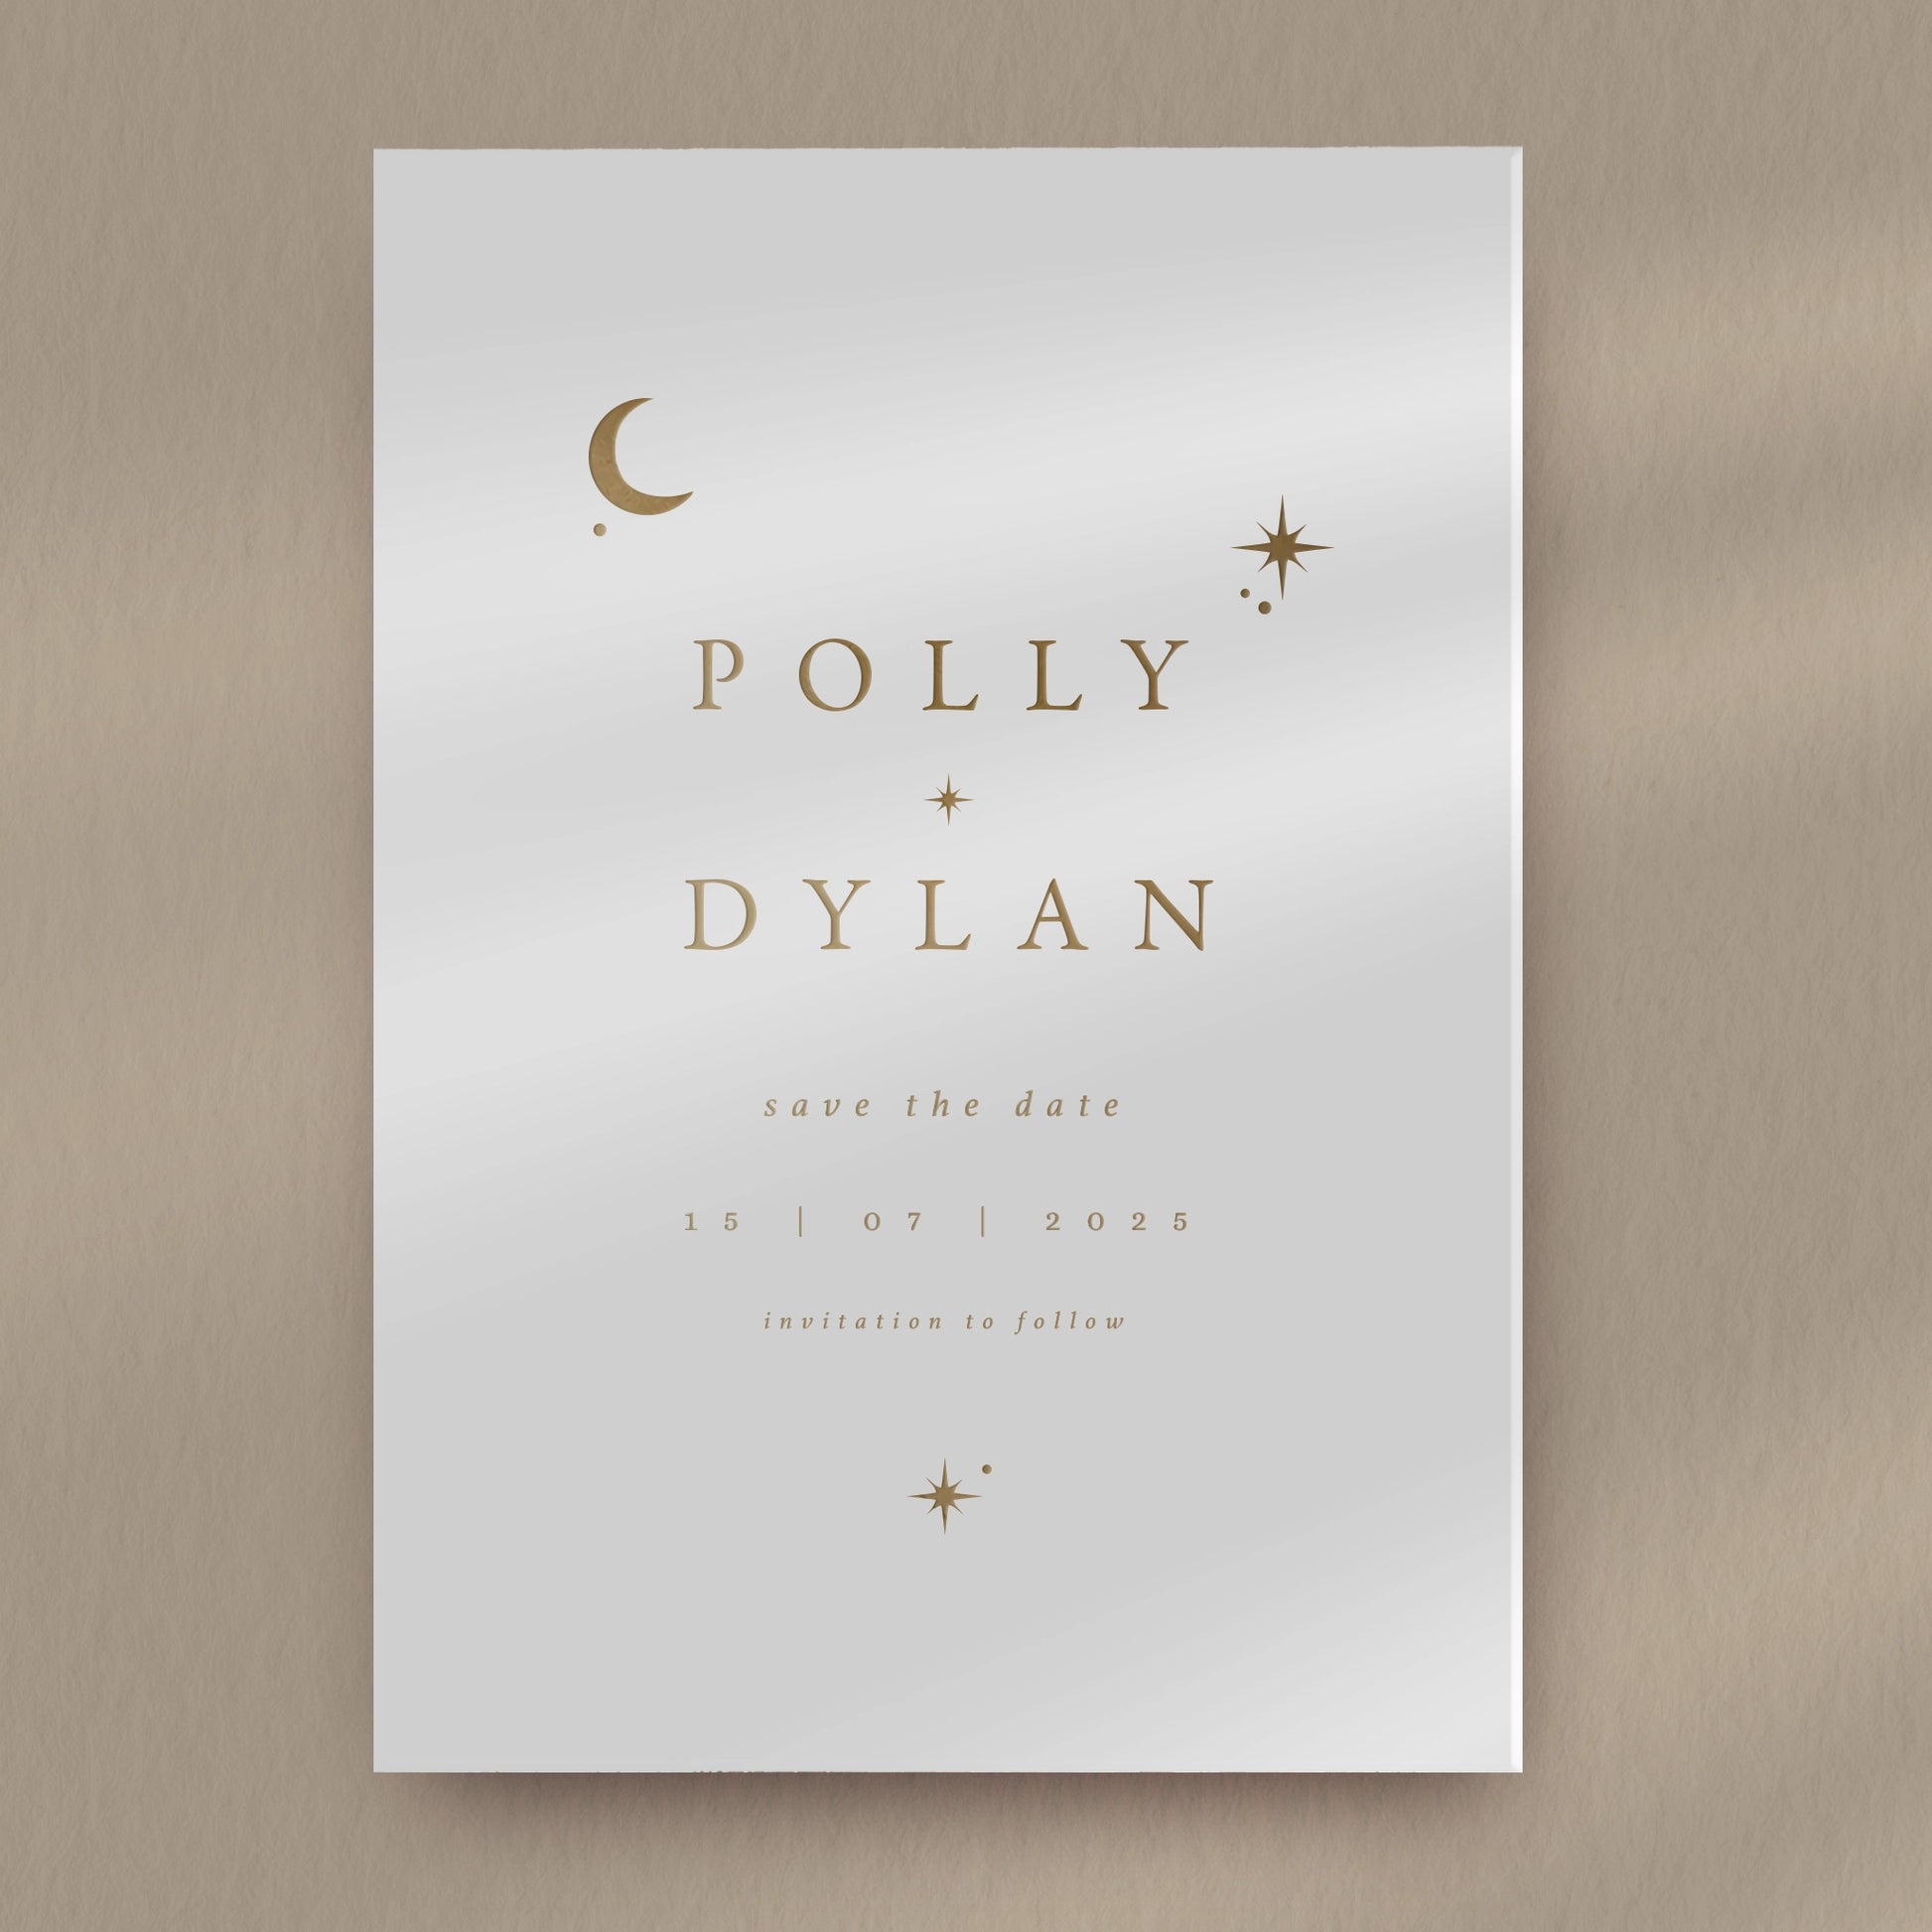 Save The Date Sample  Ivy and Gold Wedding Stationery Polly  